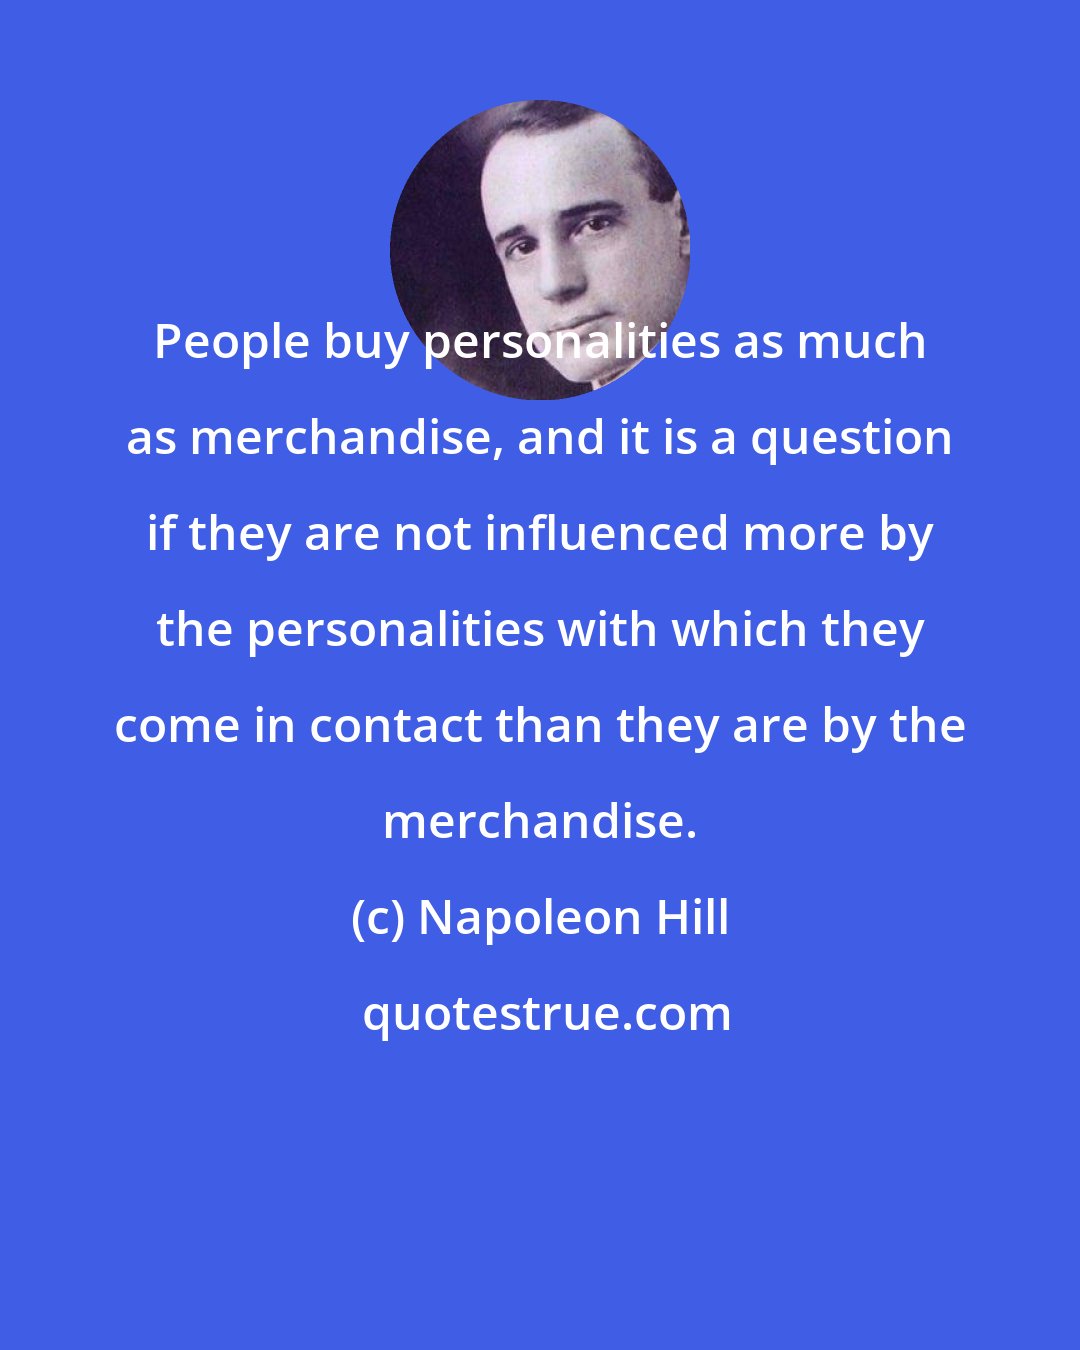 Napoleon Hill: People buy personalities as much as merchandise, and it is a question if they are not influenced more by the personalities with which they come in contact than they are by the merchandise.